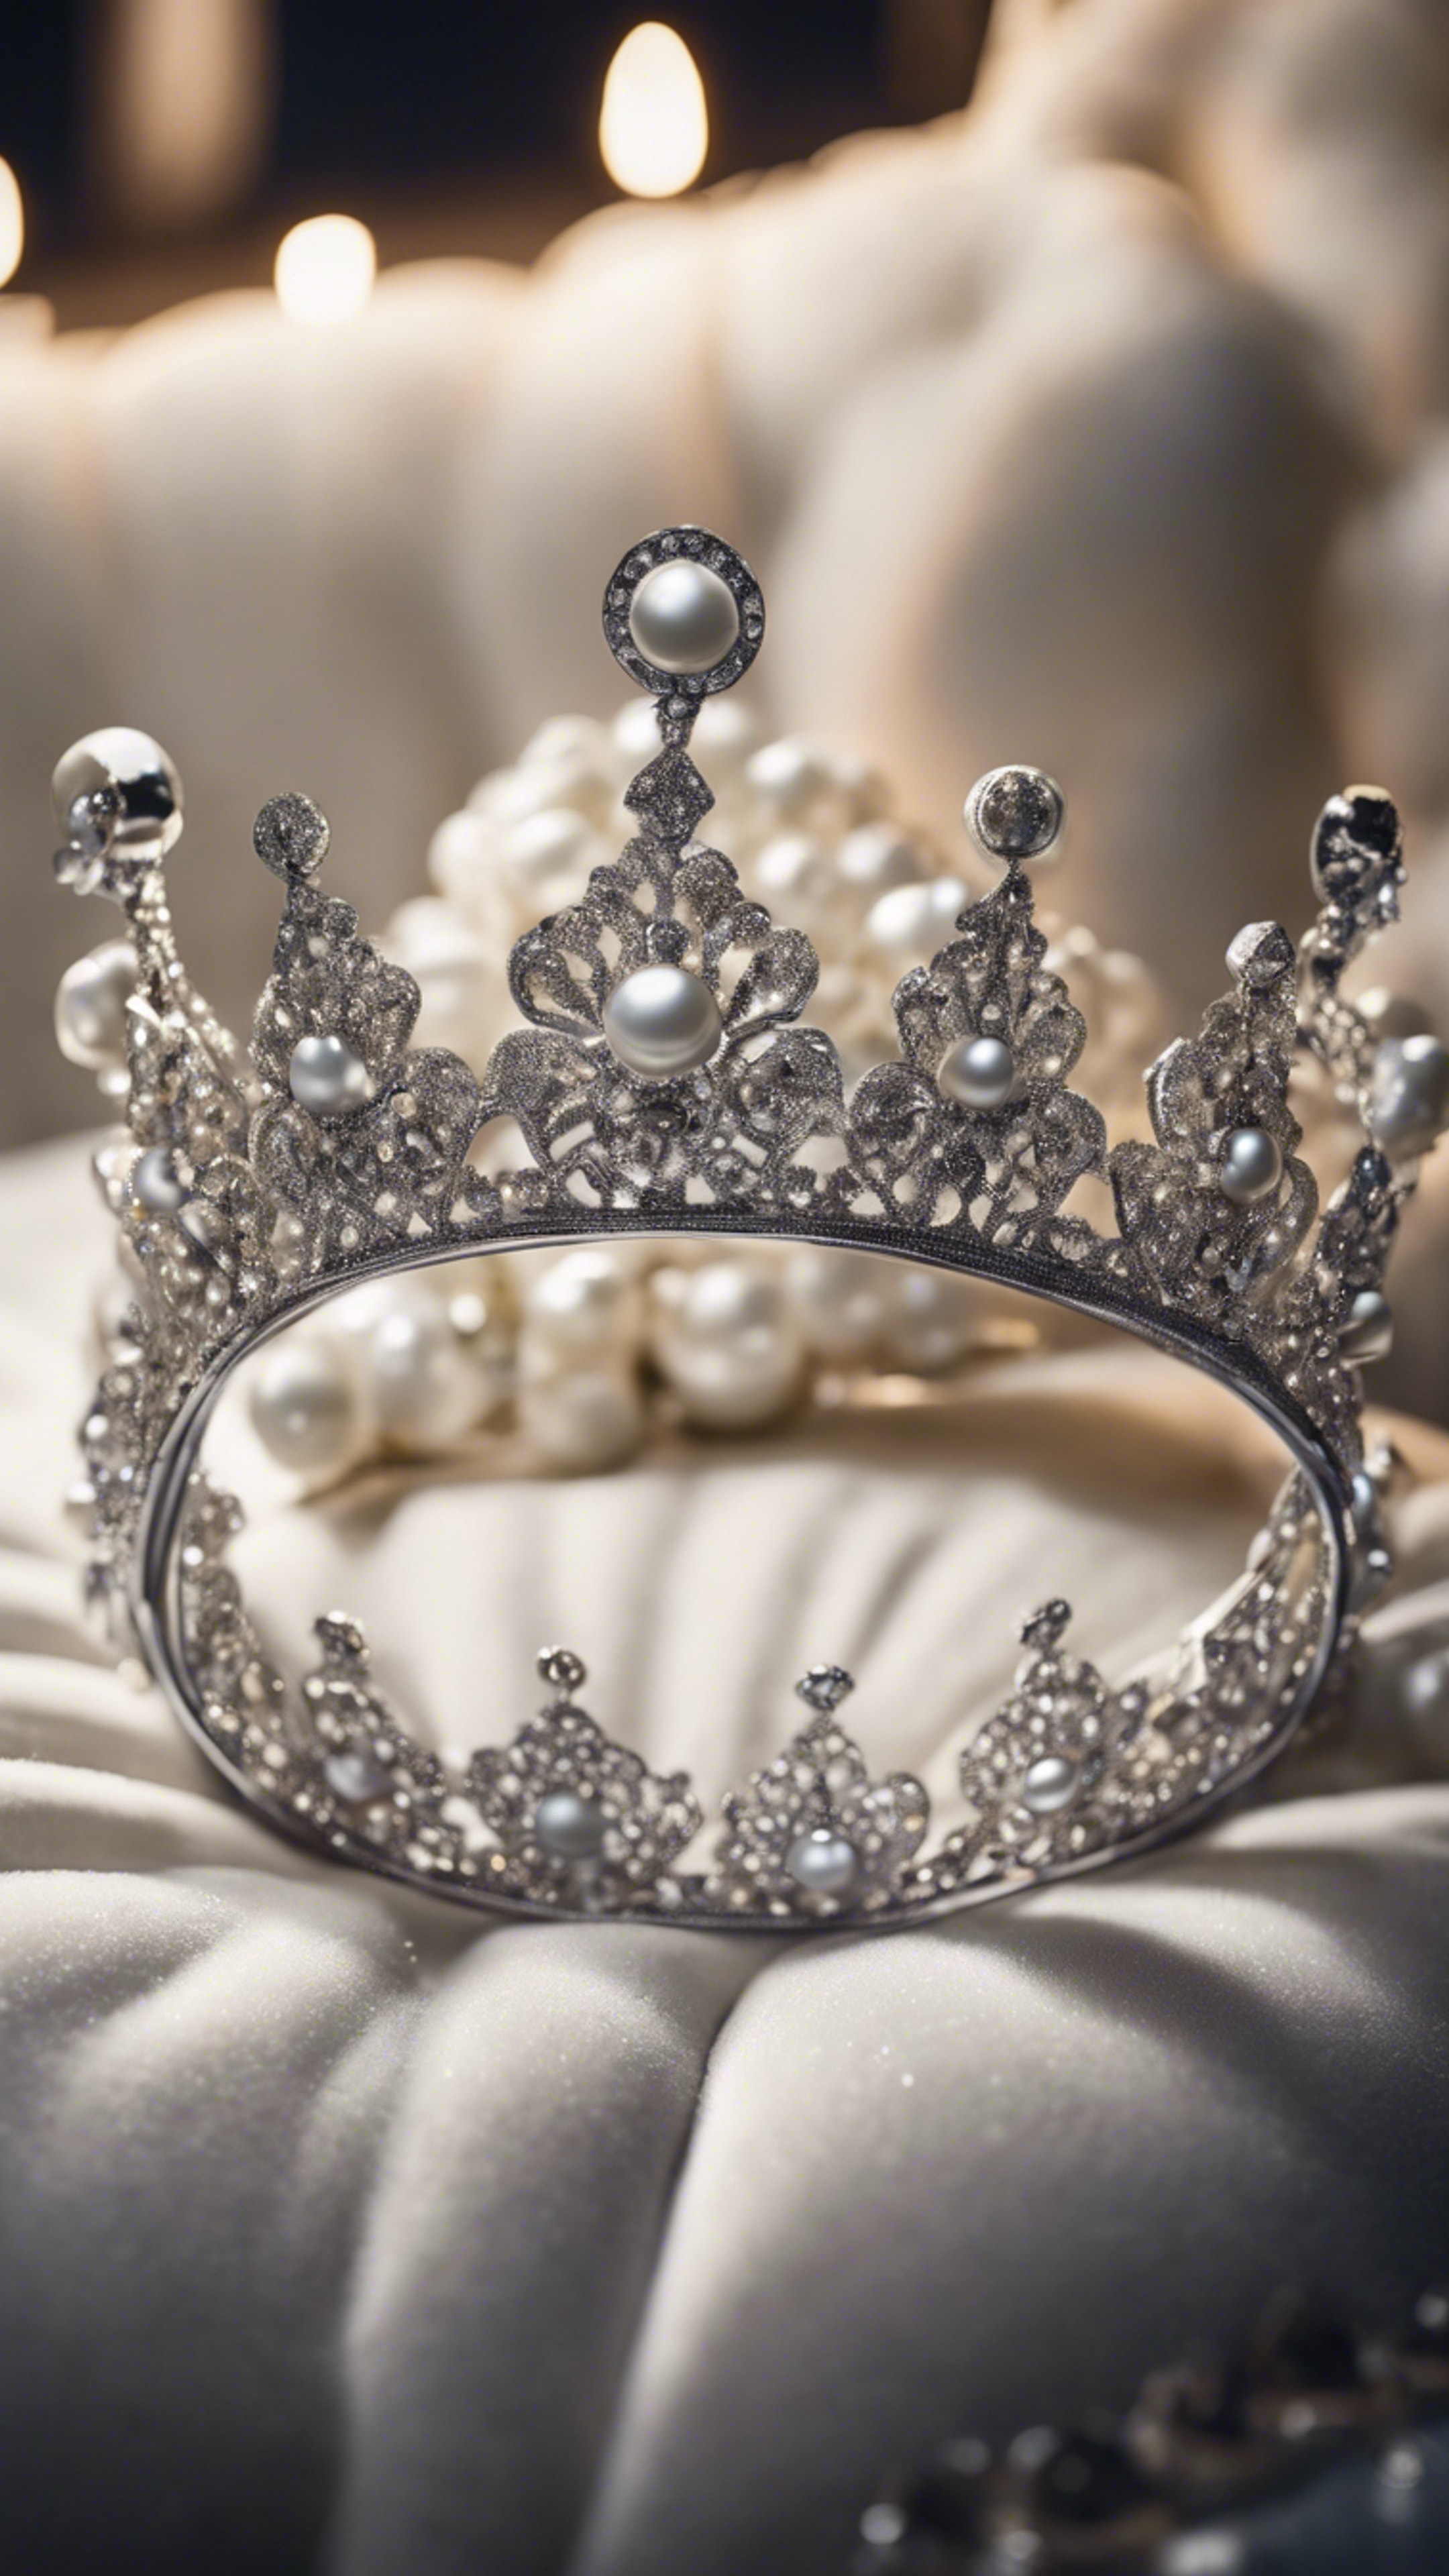 A classic silver crown embellished with pearls and diamonds lying on a white velvet cushion at night. Tapeta[f90278dd6b1c4e9ca8cc]